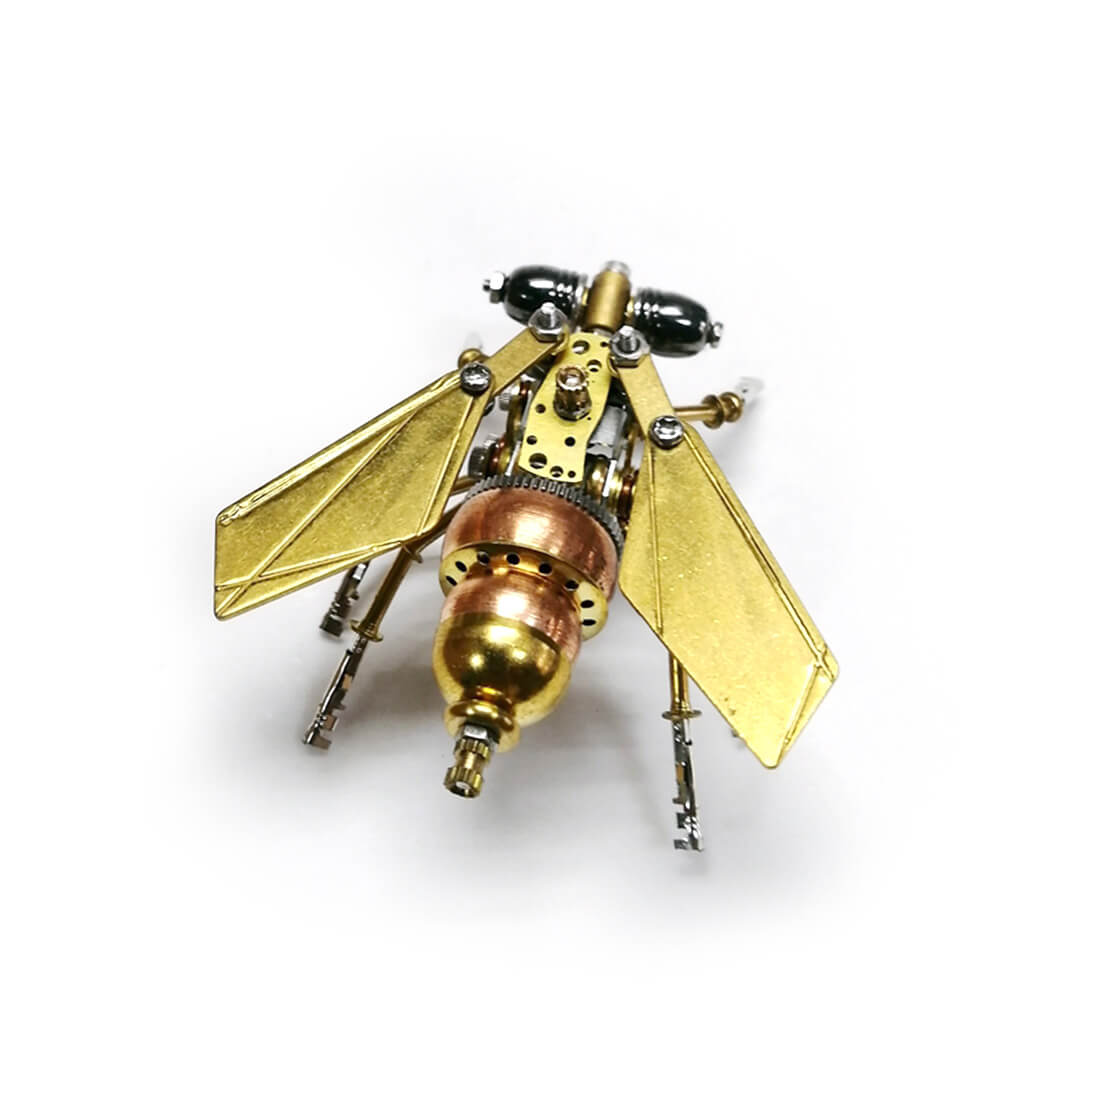 Little Fly 3D DIY Steampunk Mechanical Insect Metal Assembly Model (100+PCS)